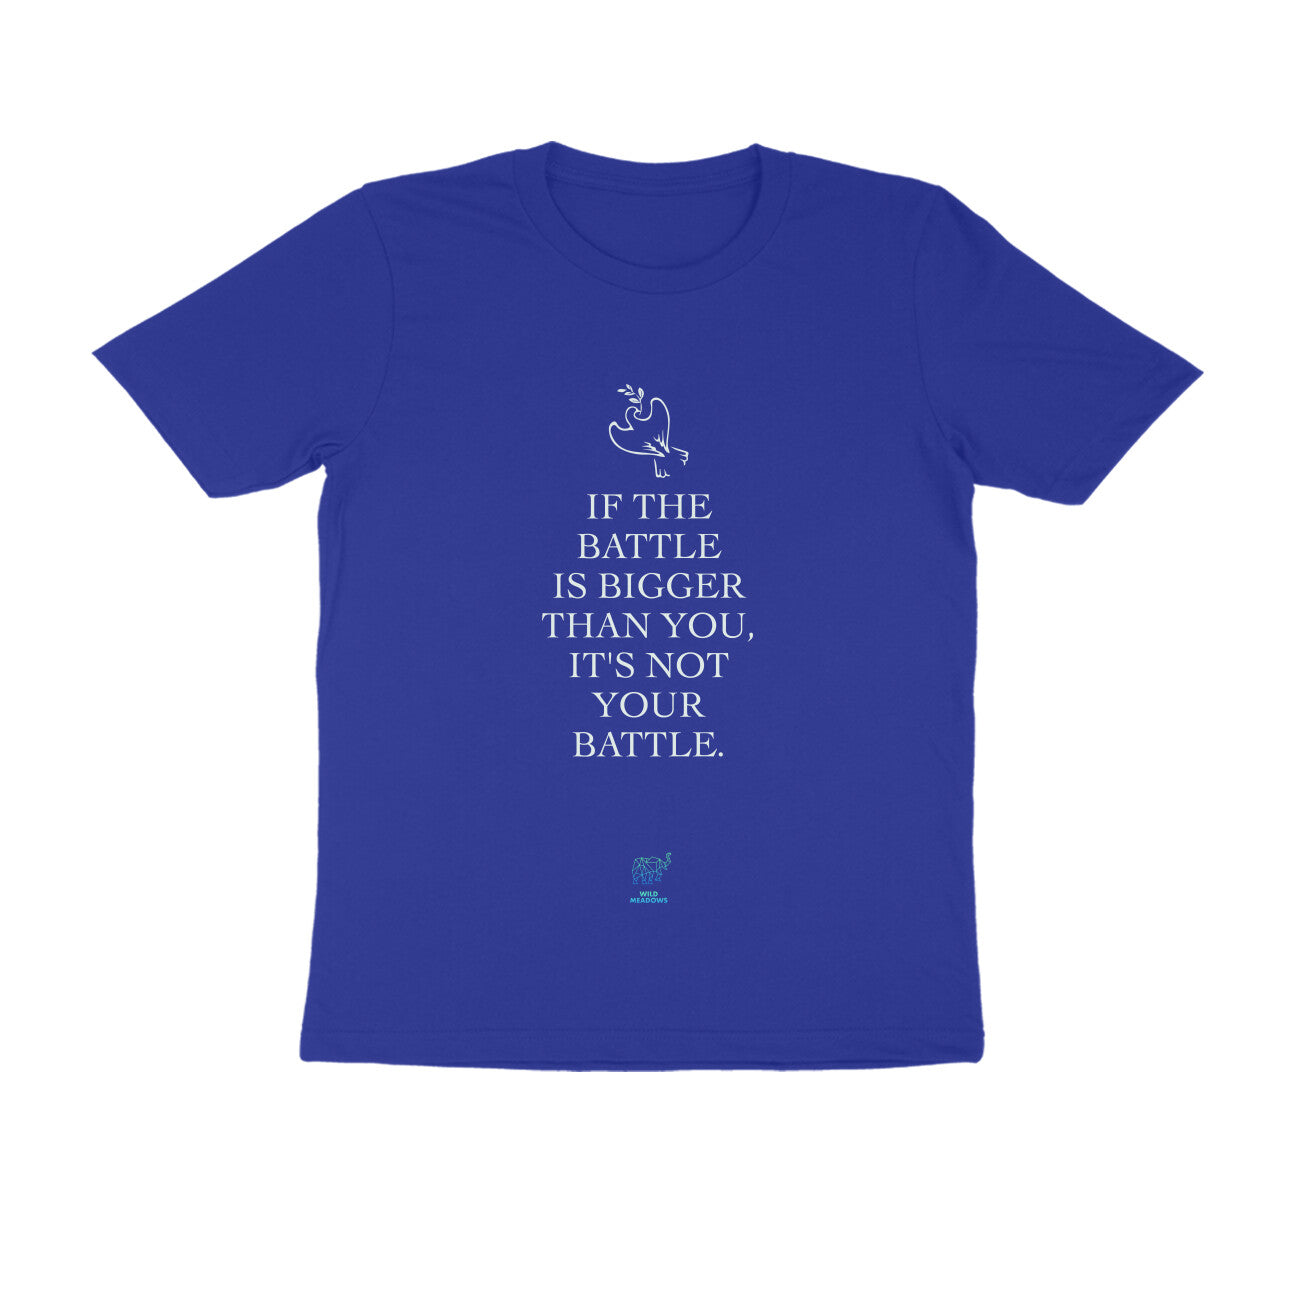 Gospel ( If a battle is bigger than you, it's not your battle )-Unisex Tees